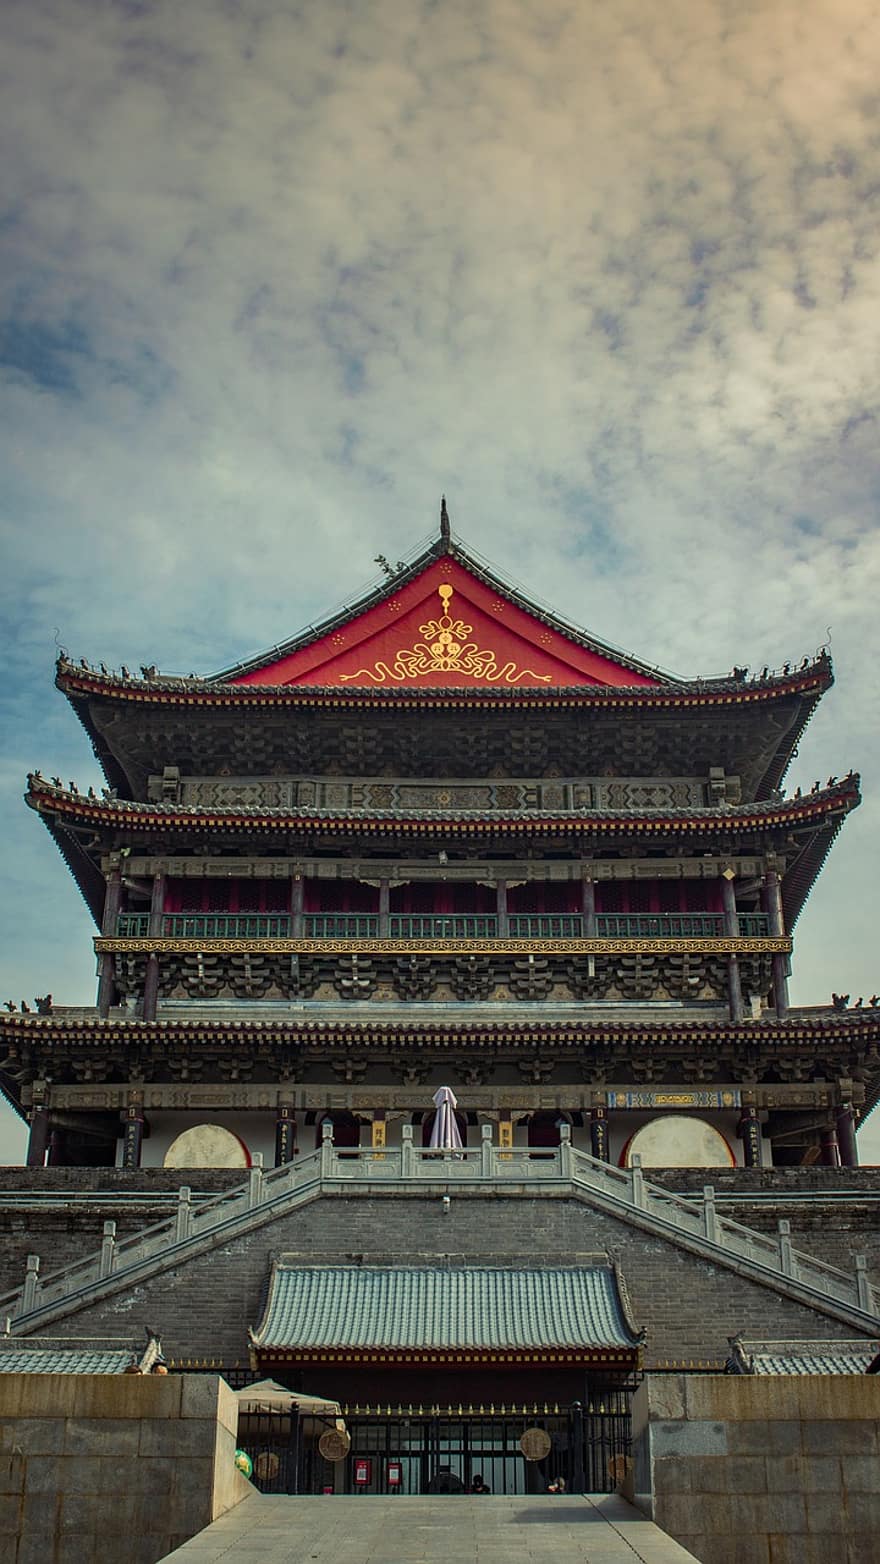 Drum Tower, Xian, China, Landmark, Historical, Building, Architecture, Facade, Entrance, Tower, City